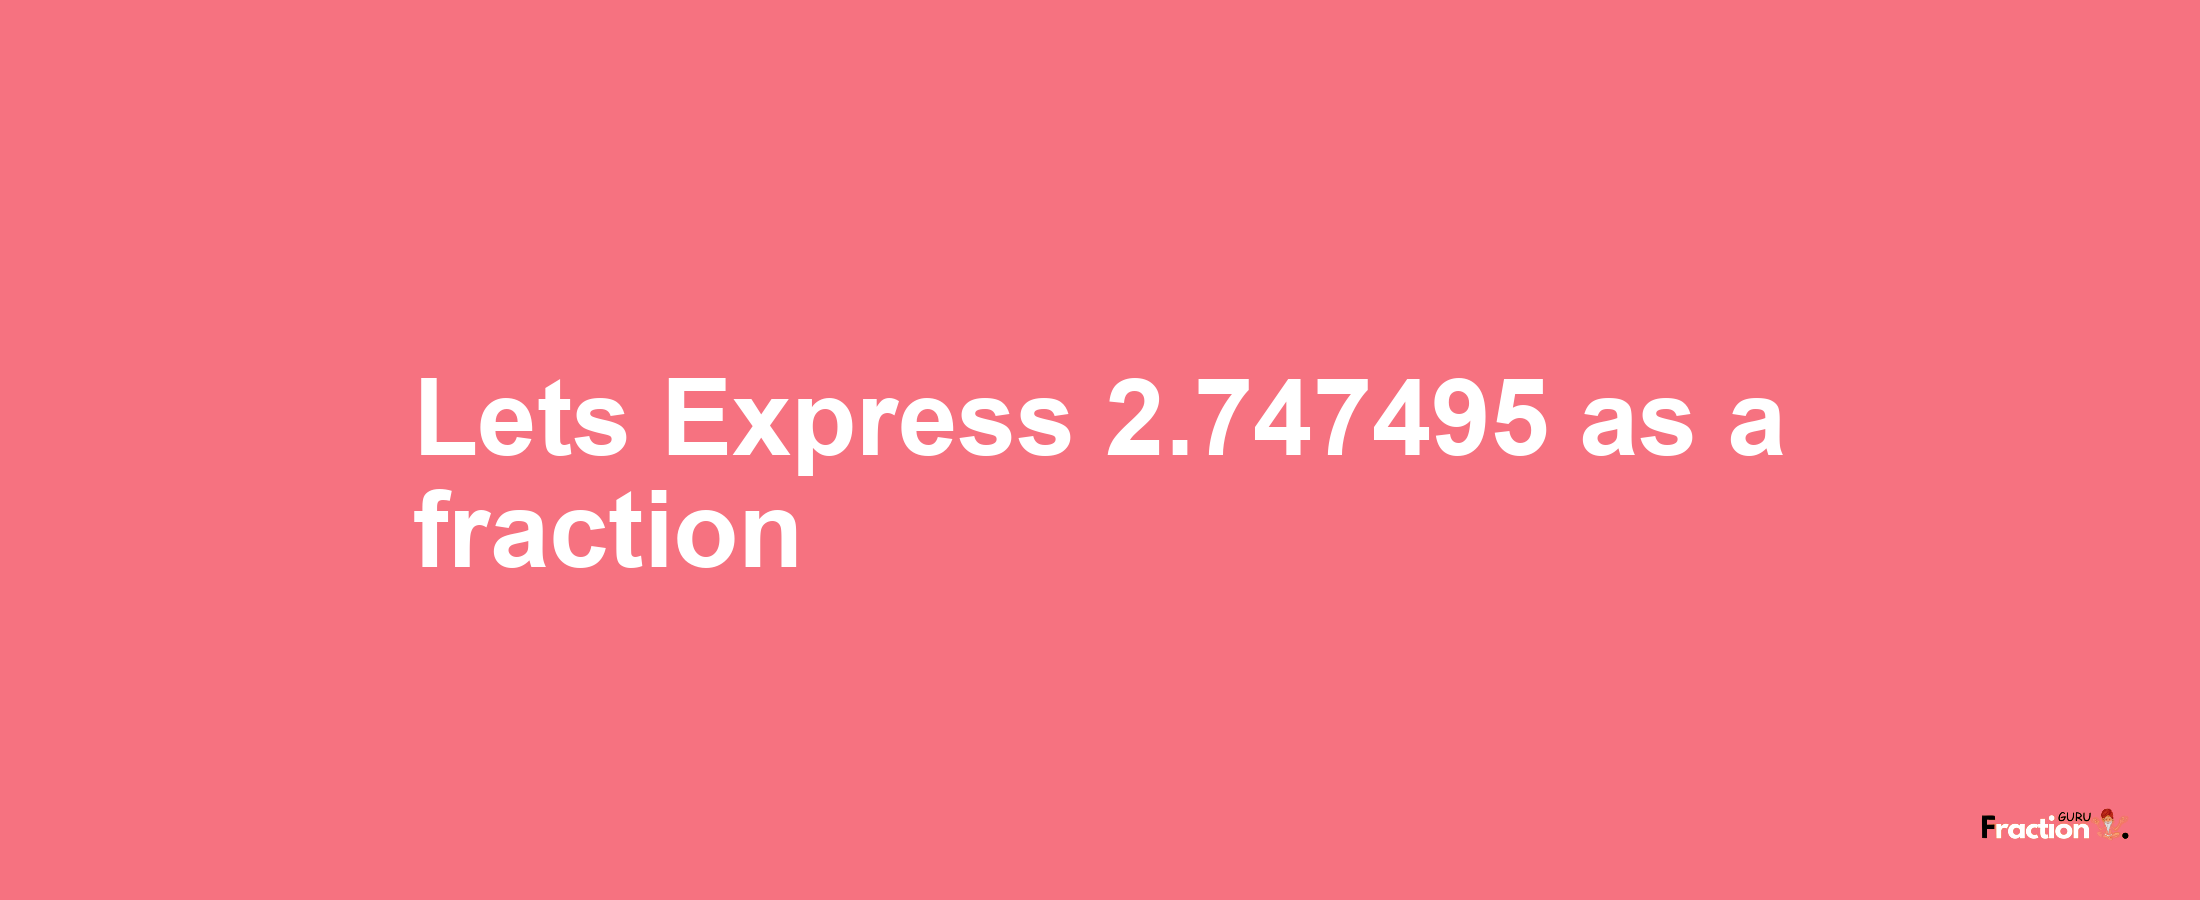 Lets Express 2.747495 as afraction